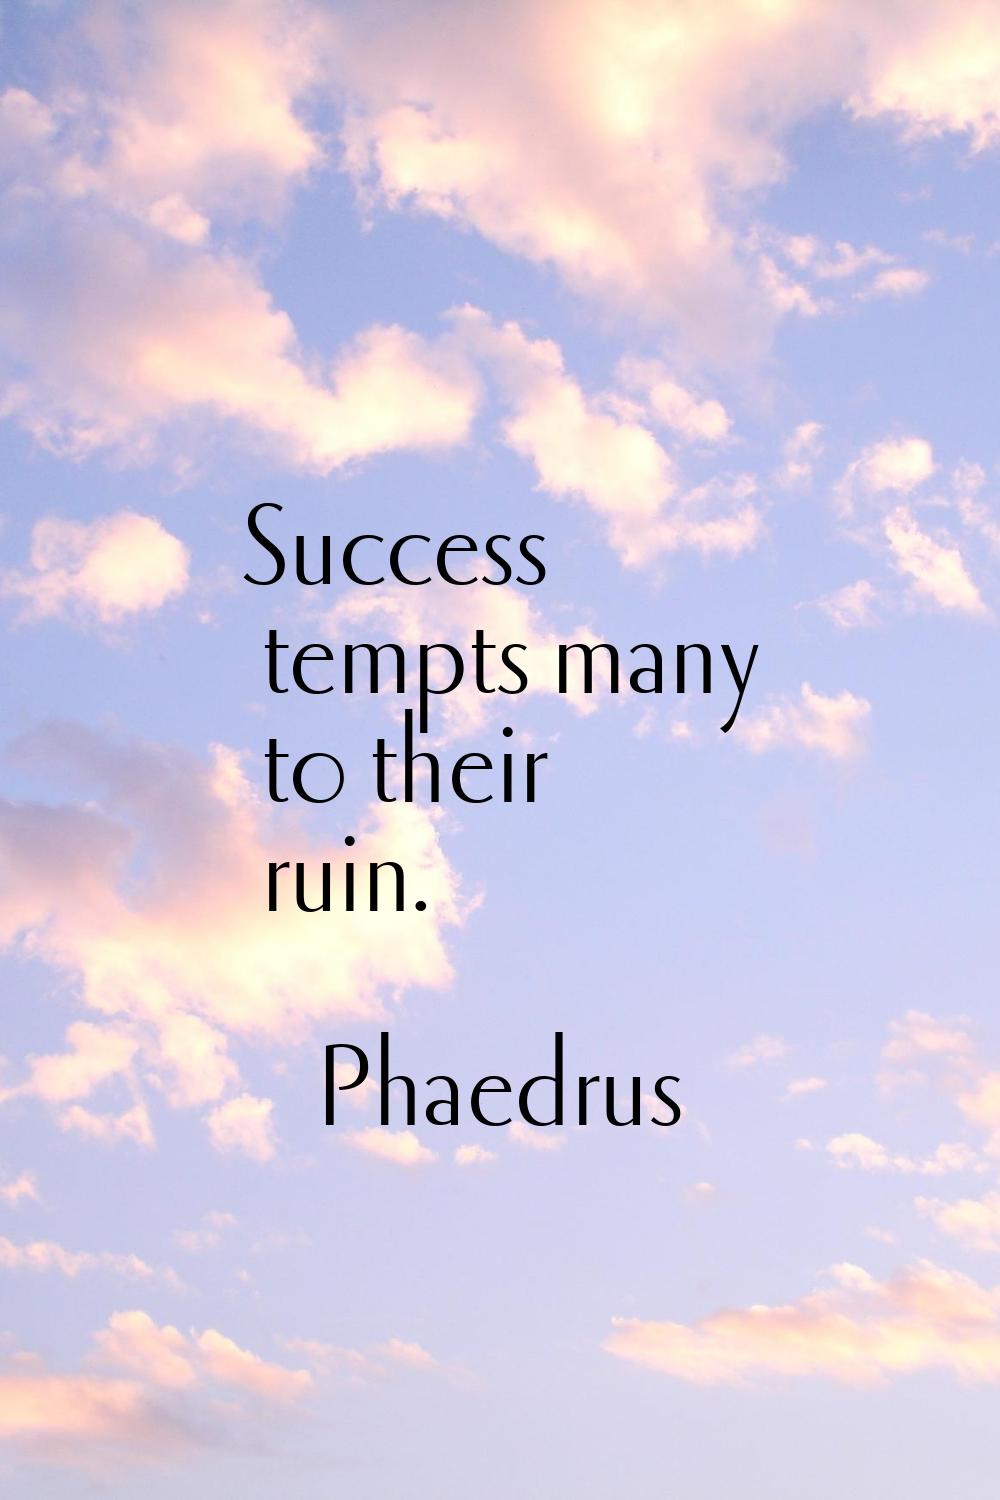 Success tempts many to their ruin.